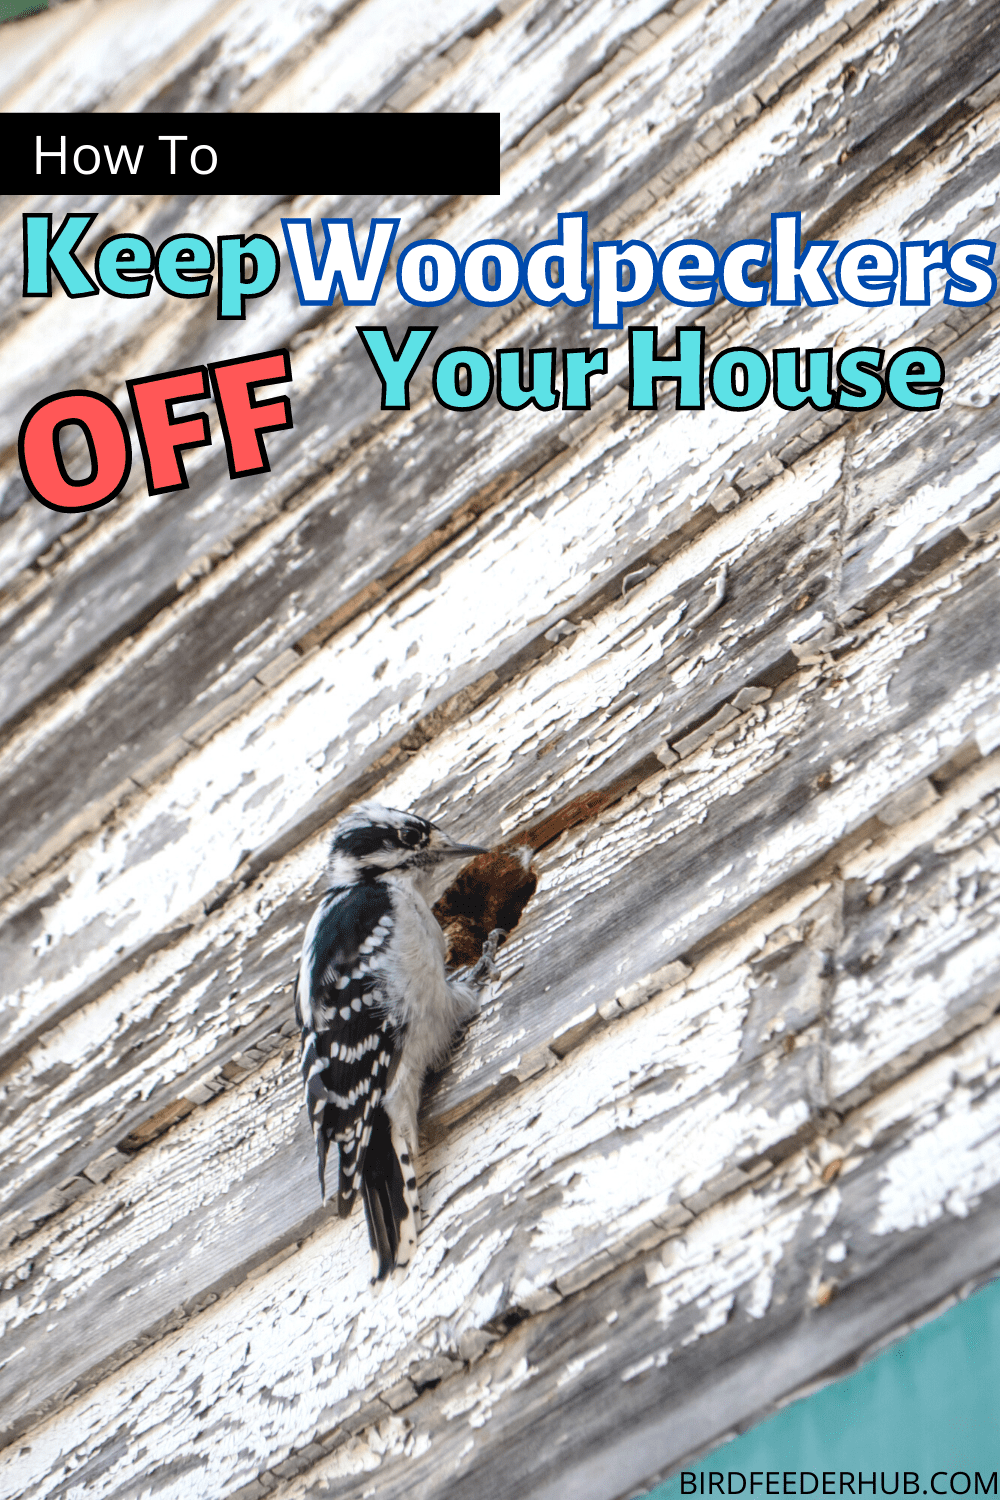 How To Prevent Woodpecker Damage HD Wallpaper